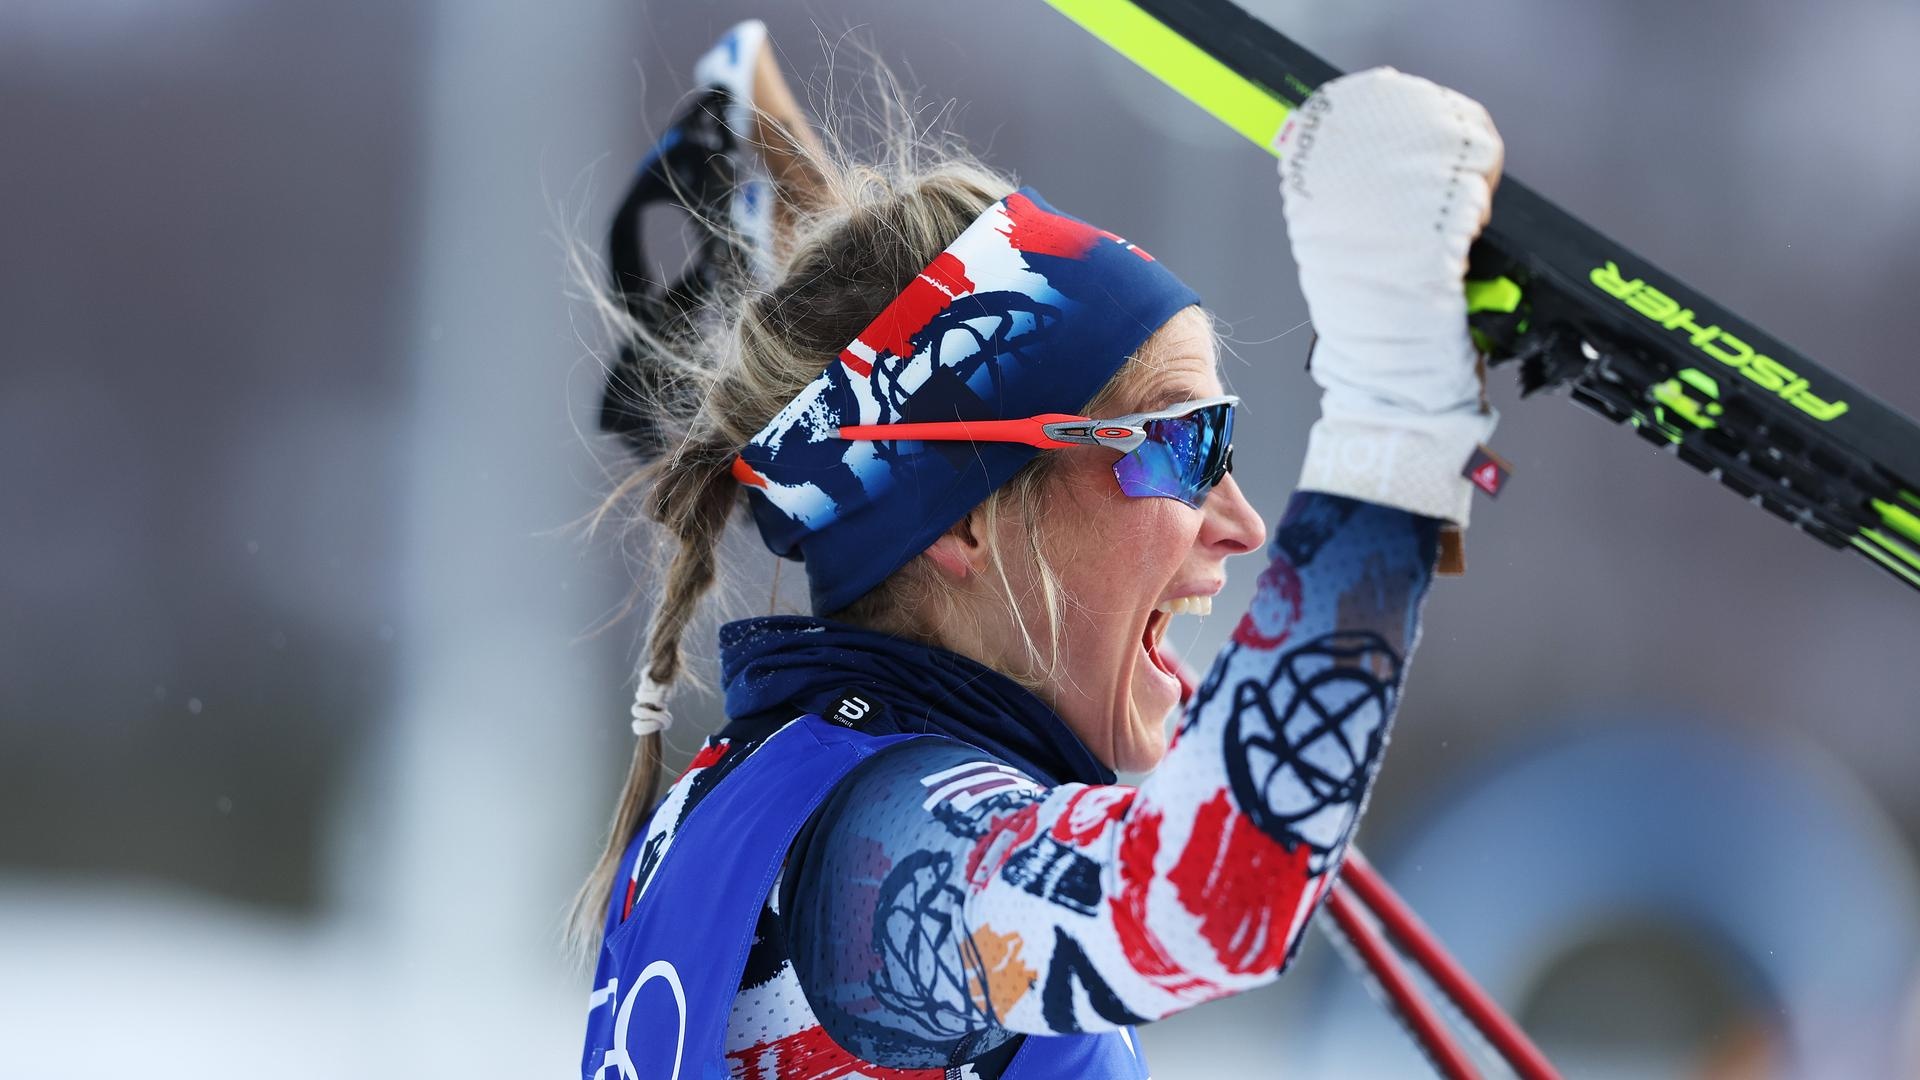 Therese Johaug, Heart-stopping finale, Gold medal triumph, Cross-country skiing sensation, 1920x1080 Full HD Desktop